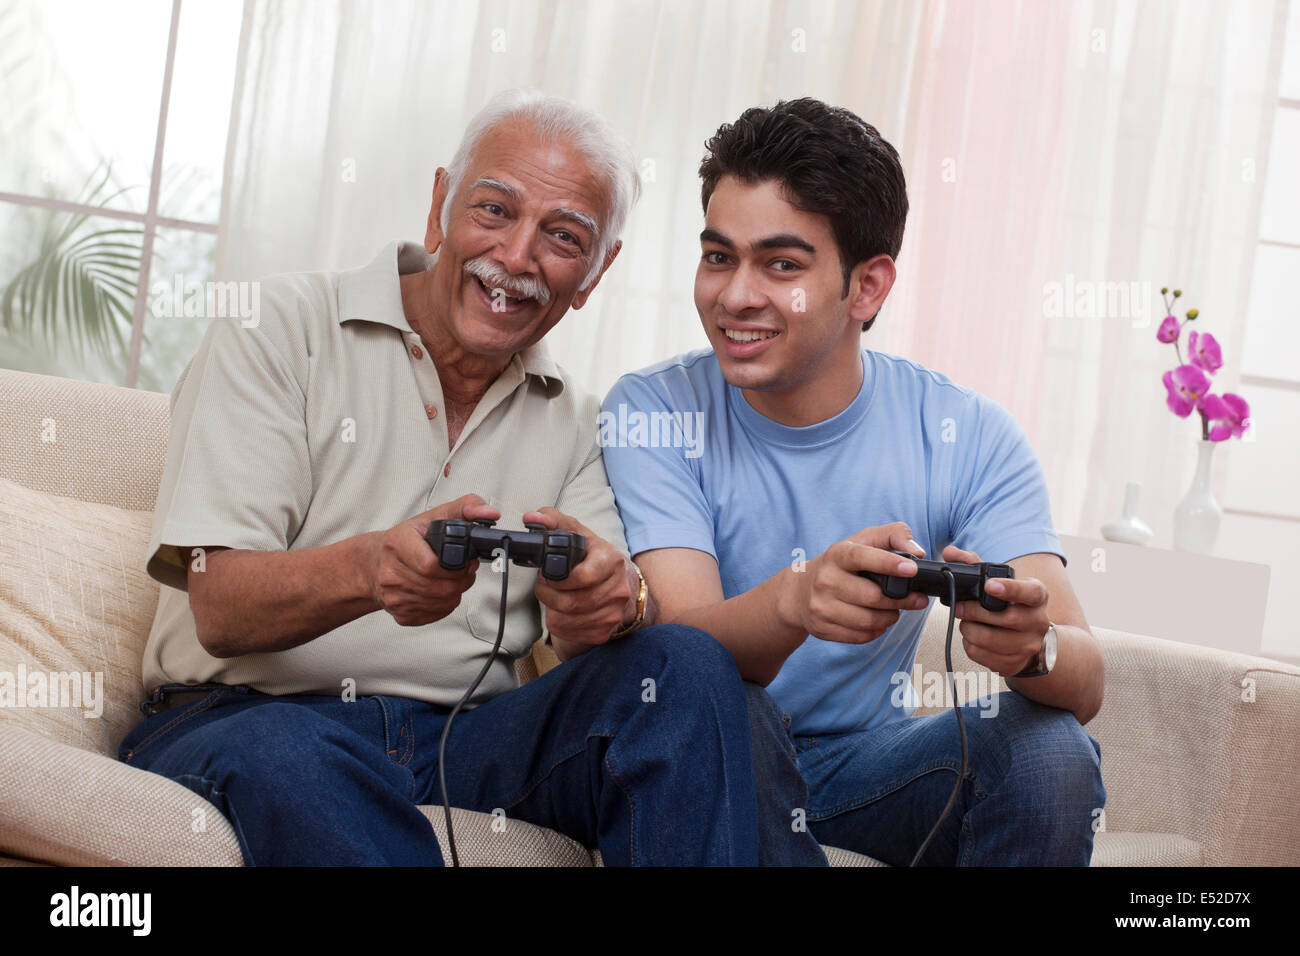 Grandfather and grandson playing video game Stock Photo